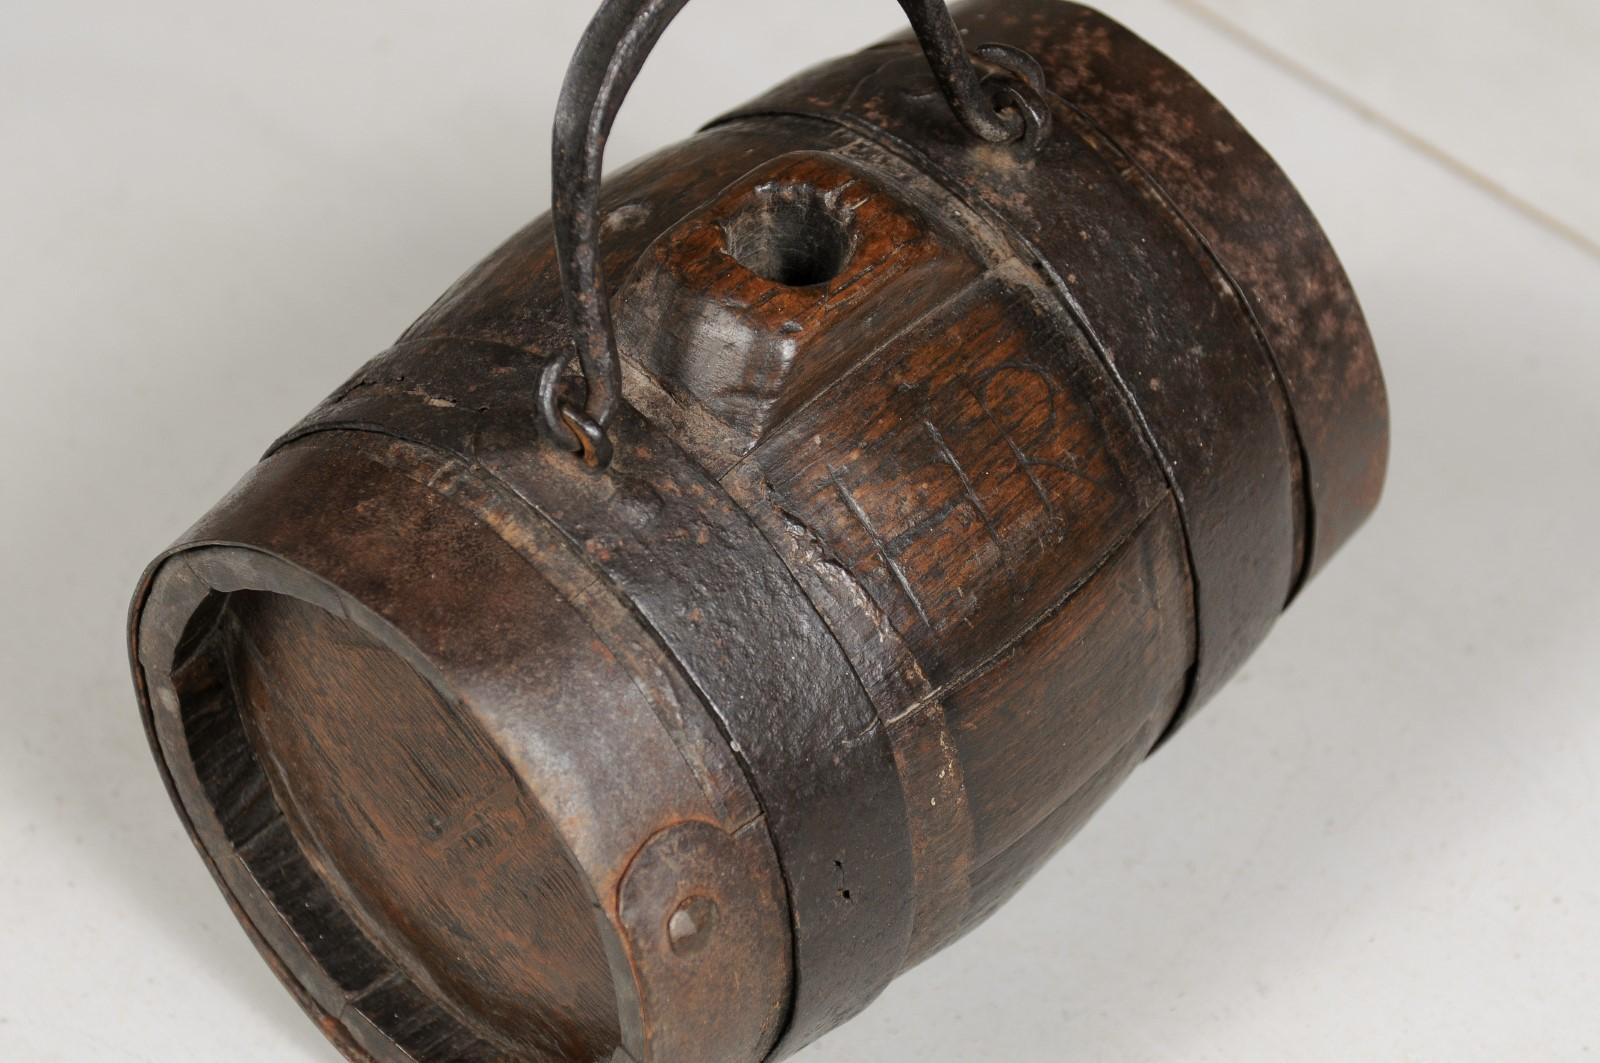 Wood Rustic French 19th Century Petite Decorative Barrel with Iron Handle and Braces For Sale